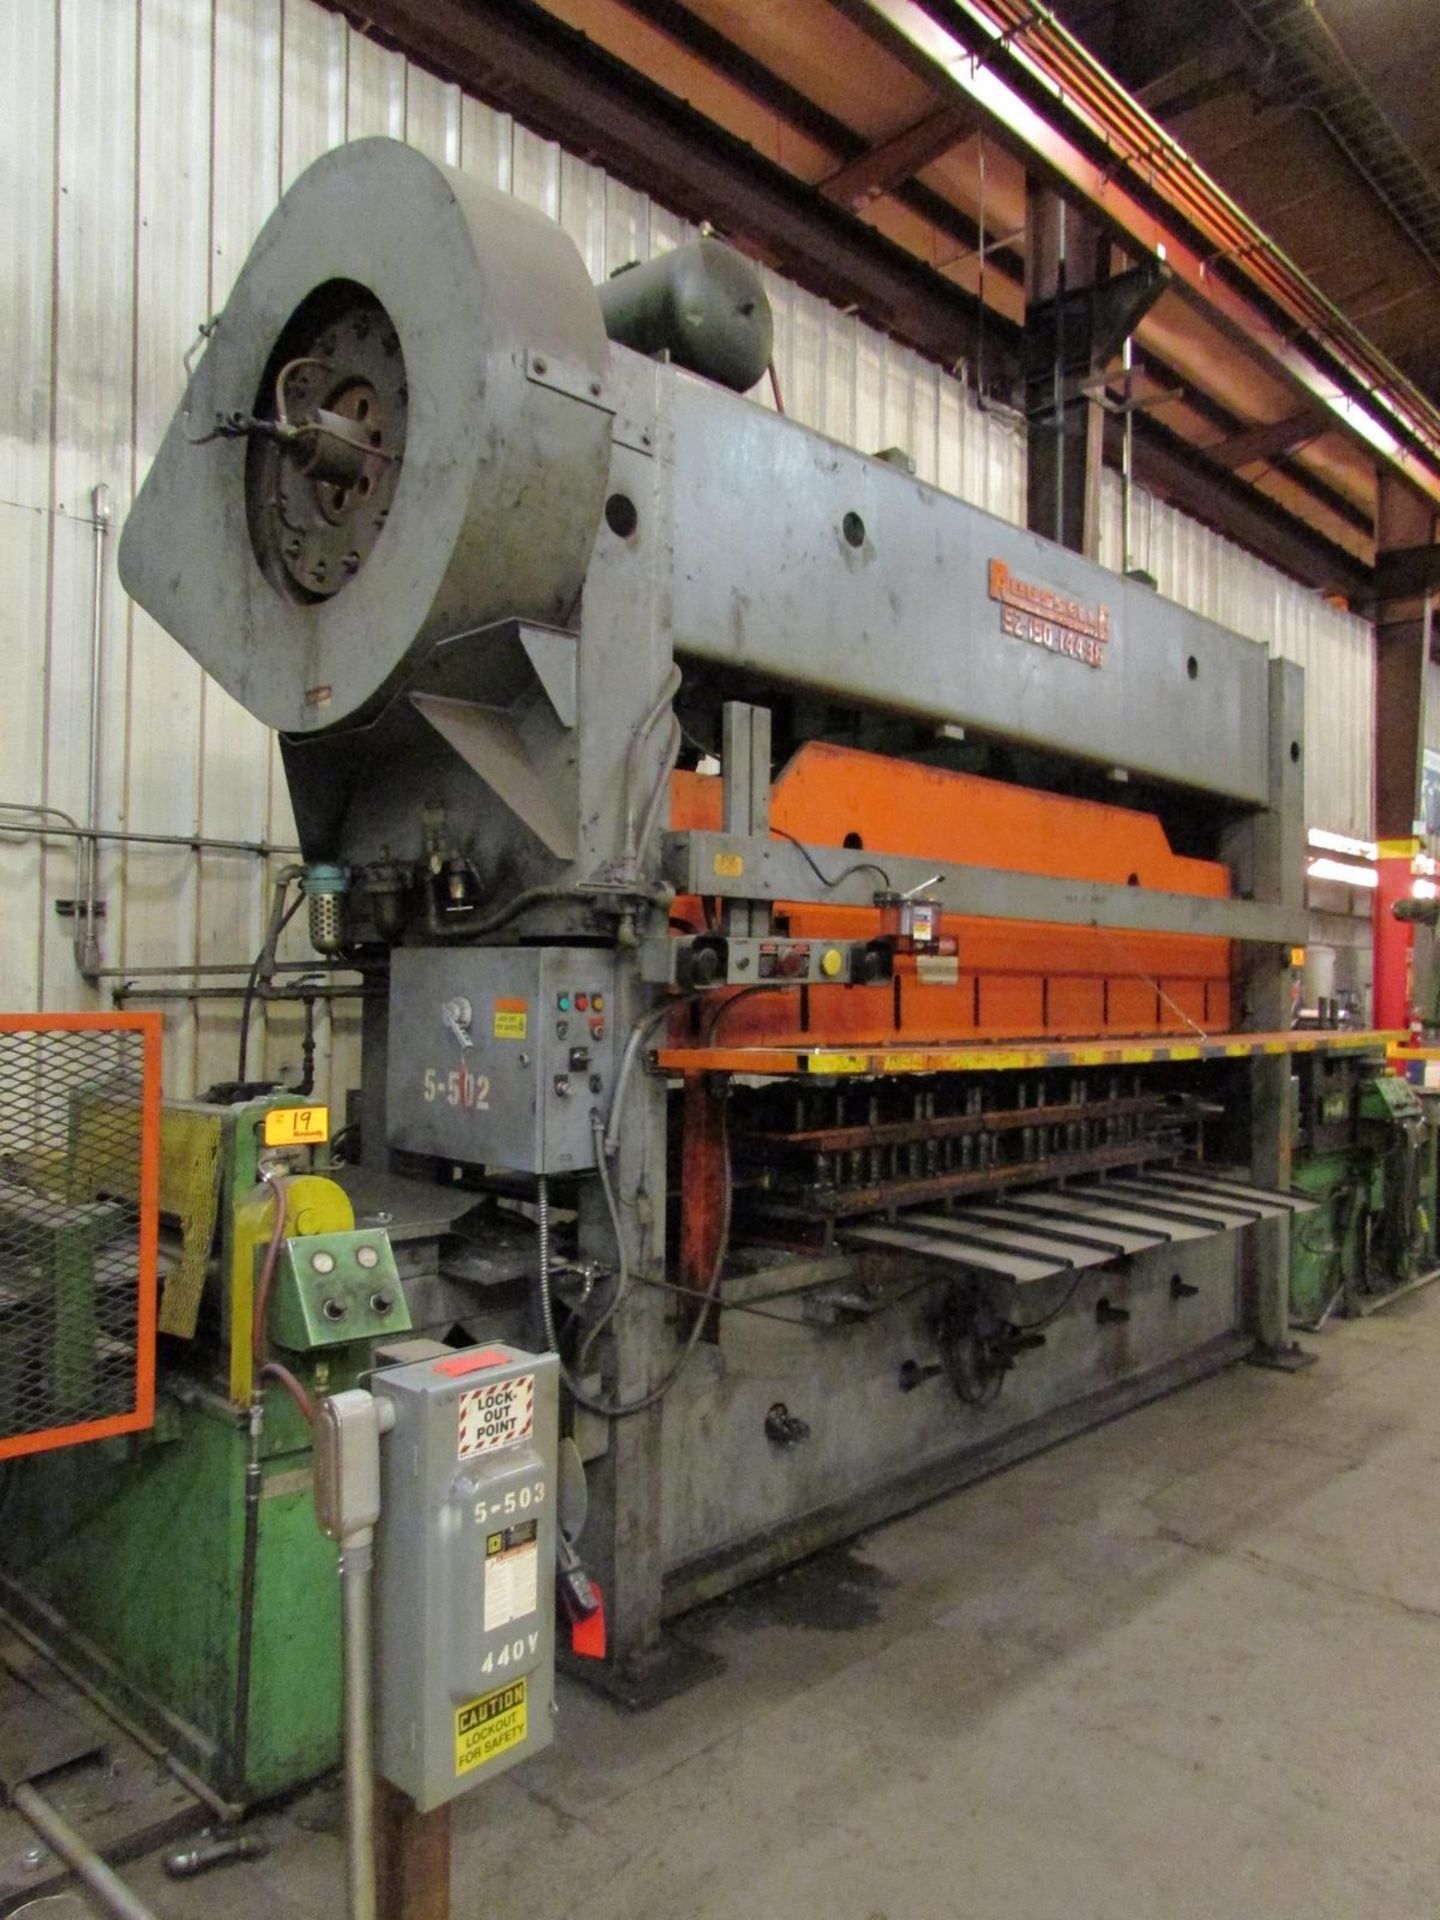 Rousselle 150 Ton Straight Side Press, Mdl: S2-150-144-36, Bed: 12' L to R, 3' F to B, 4" Stroke, - Image 6 of 13